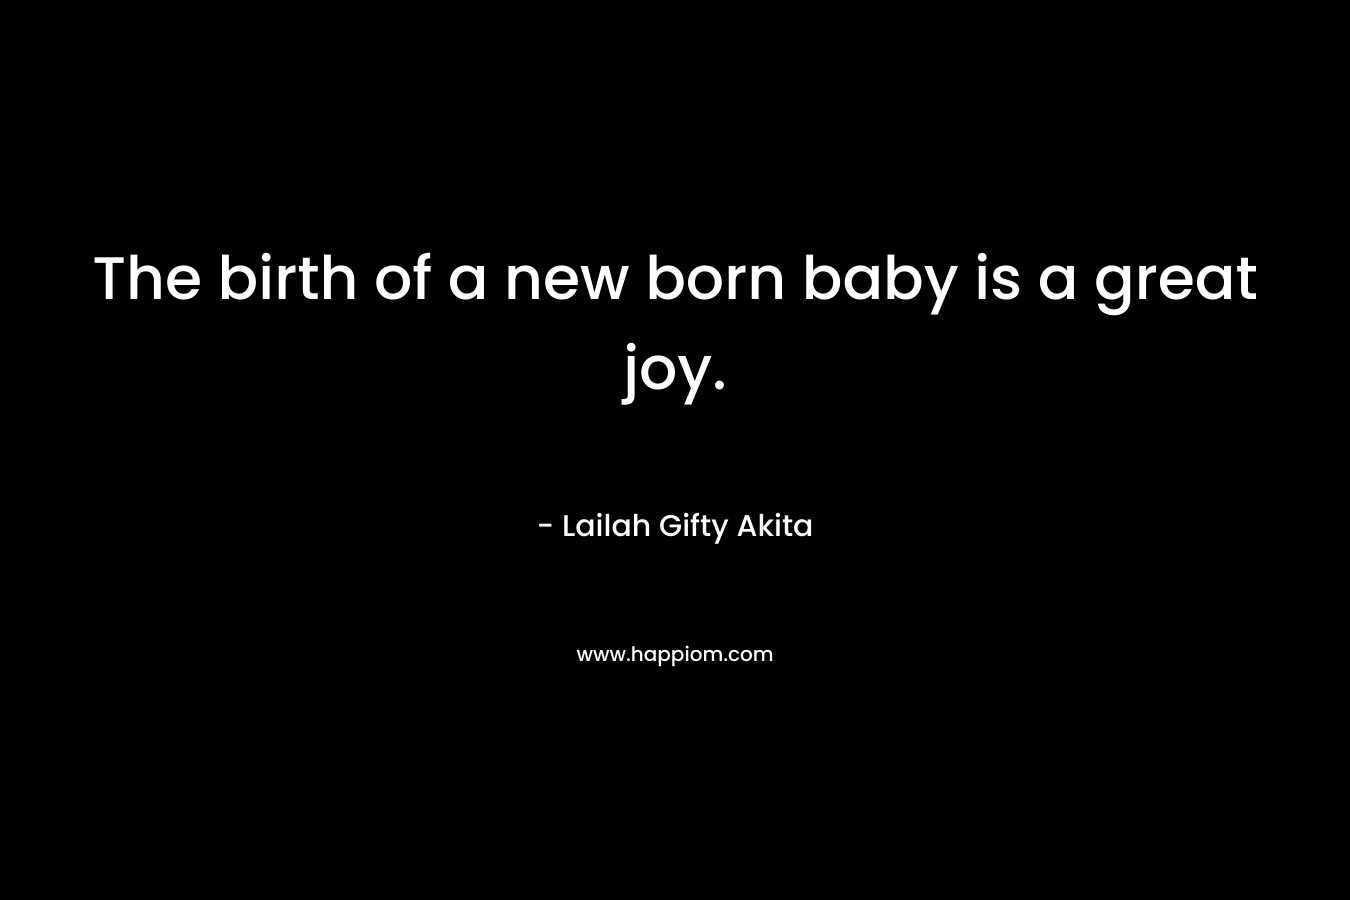 The birth of a new born baby is a great joy.